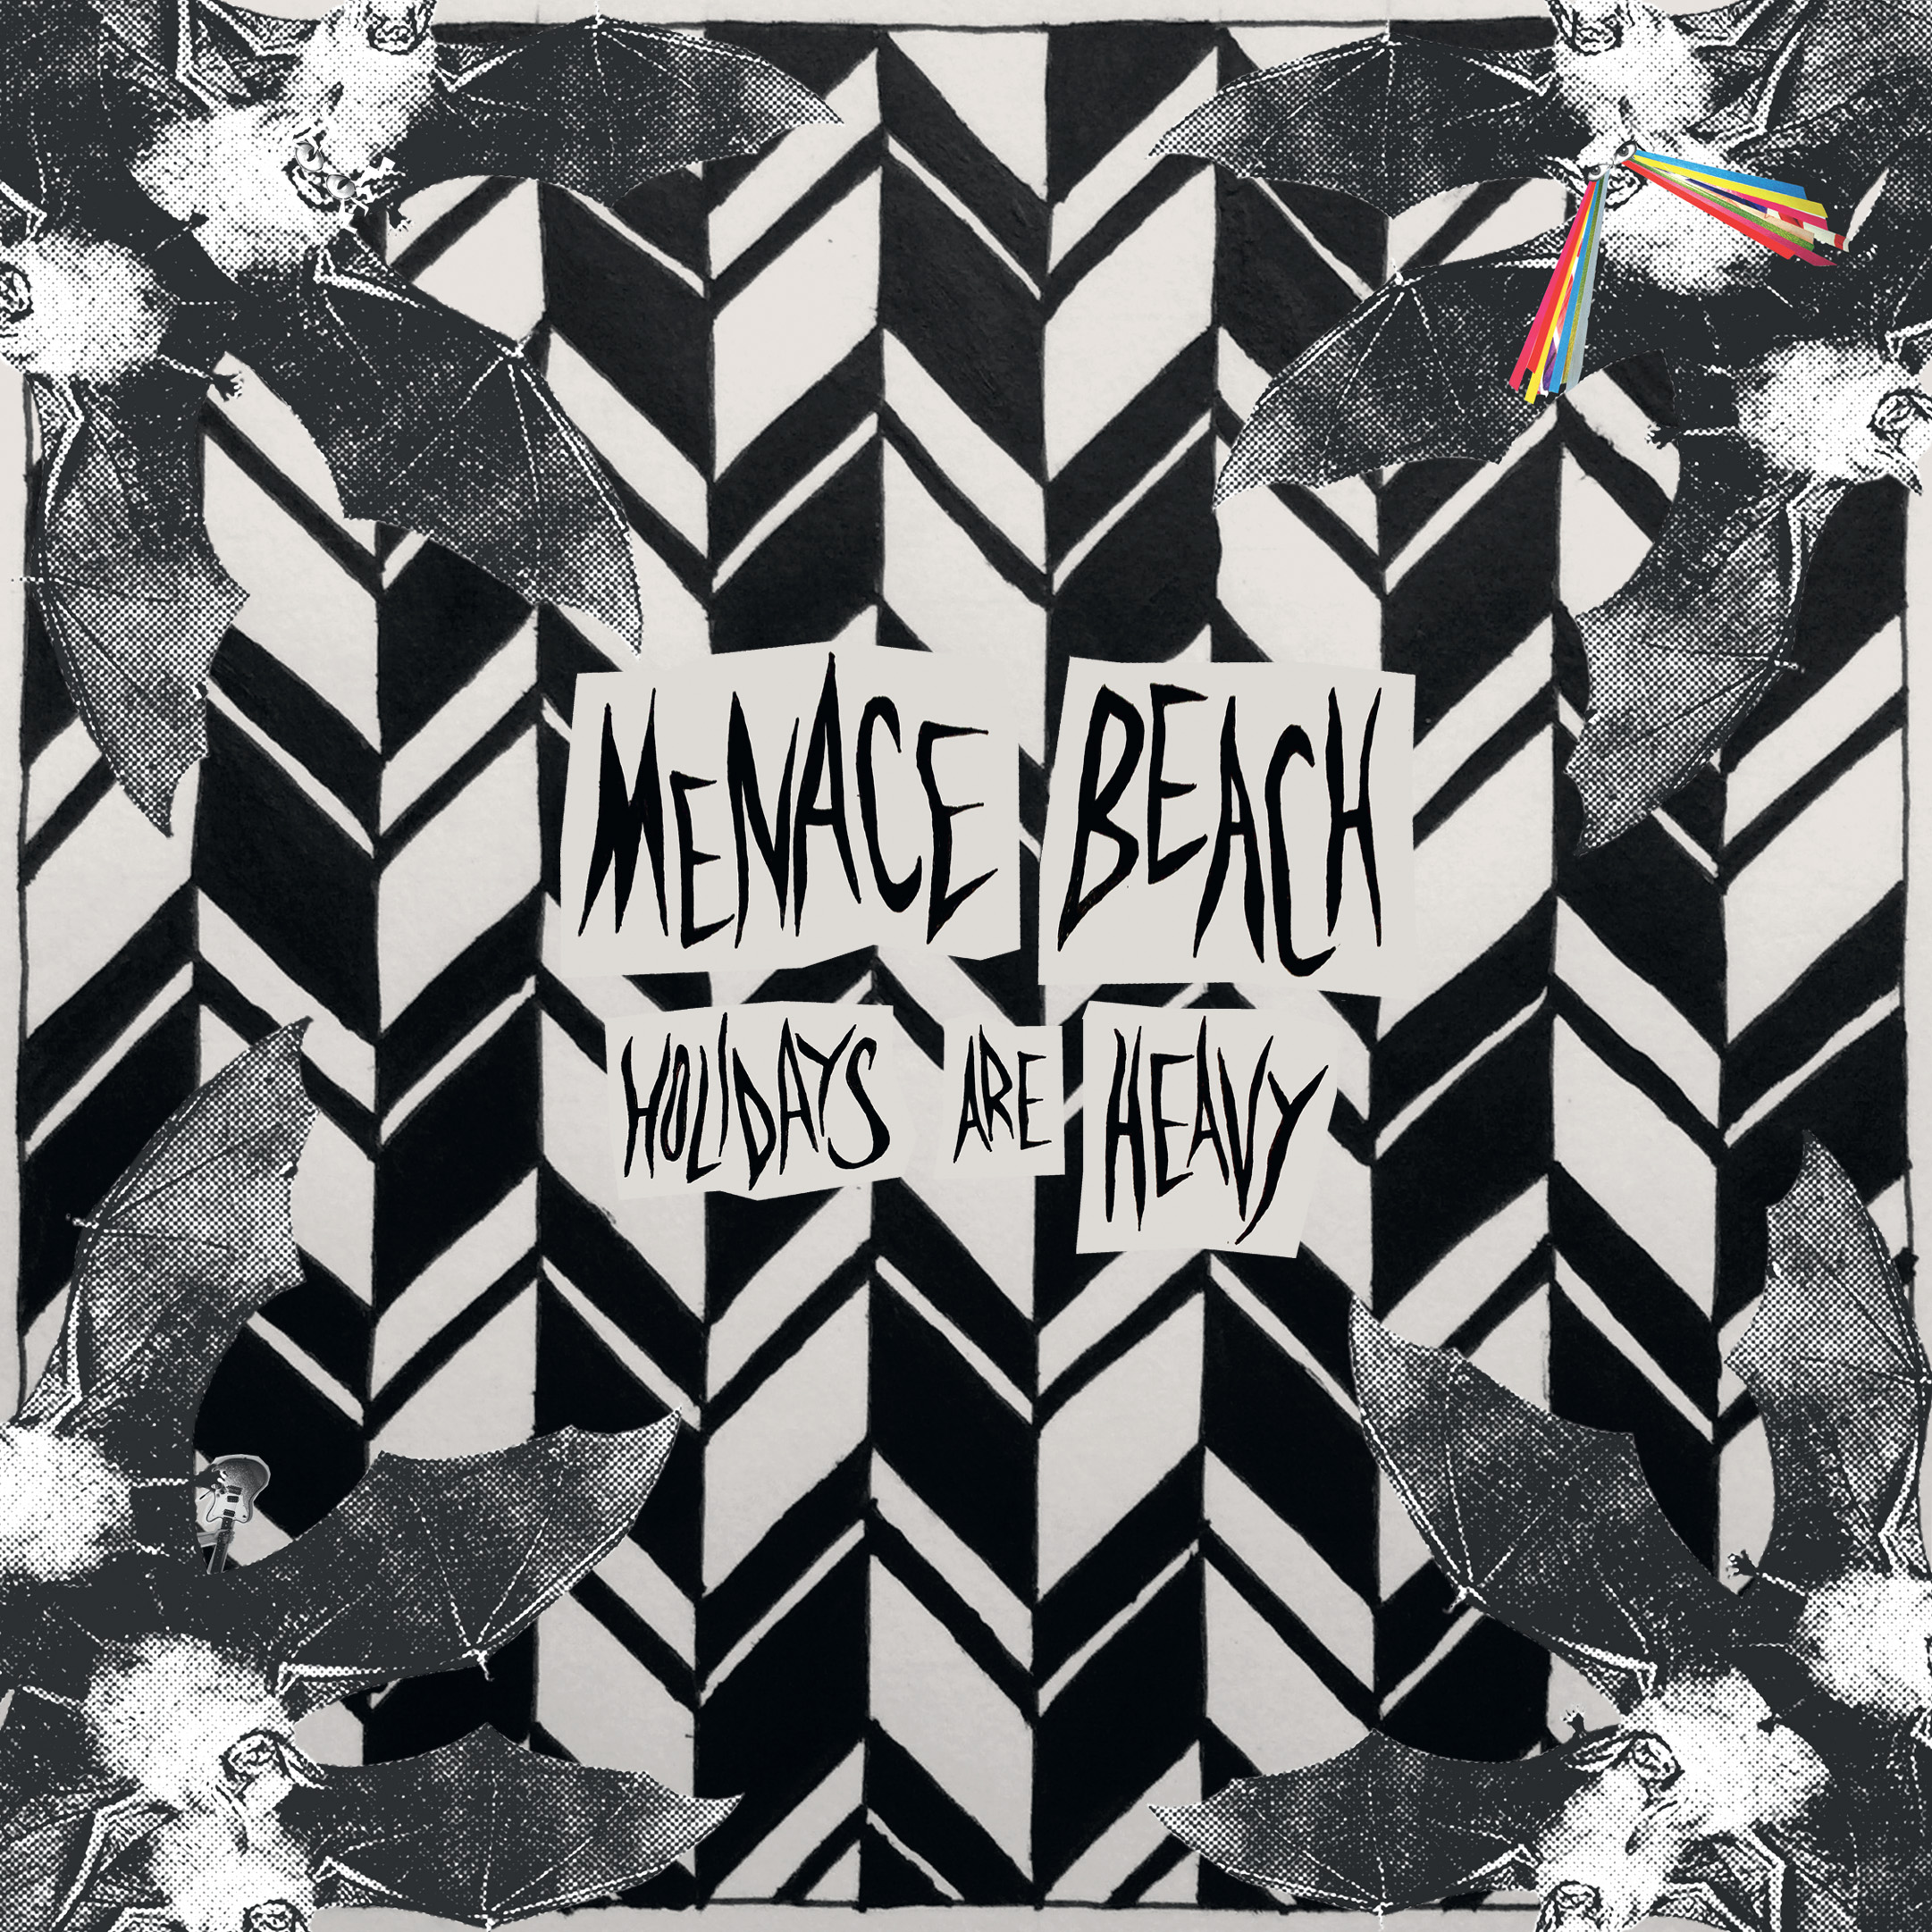 Menace Beach shoot for a starry night on ‘Holidays Are Heavy’